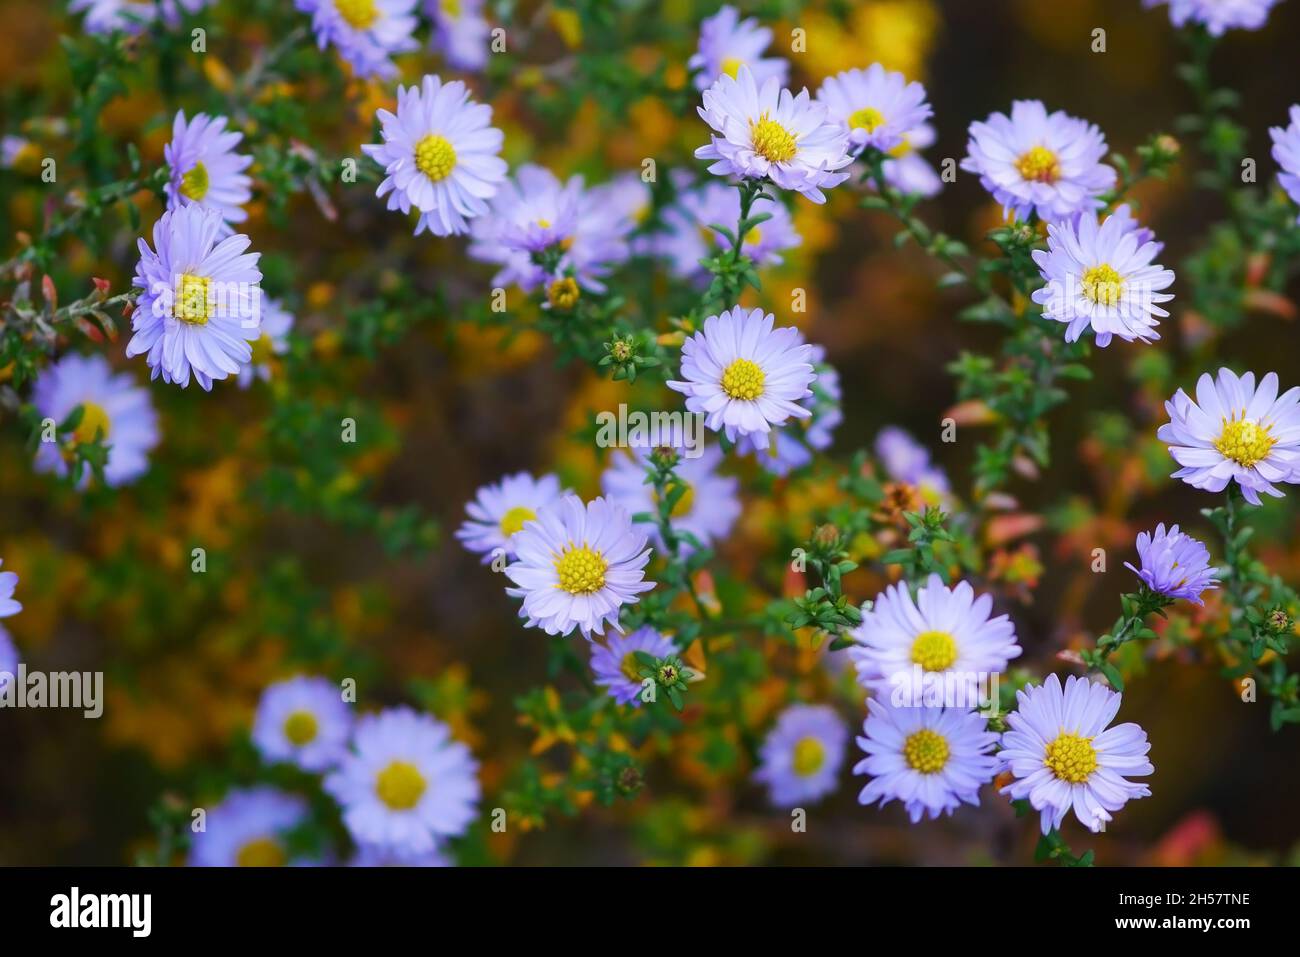 The blossoming New york aster bush in the fall. Aster American (Aster novi-belgii). Symphyotrichum novi-belgii. Stock Photo